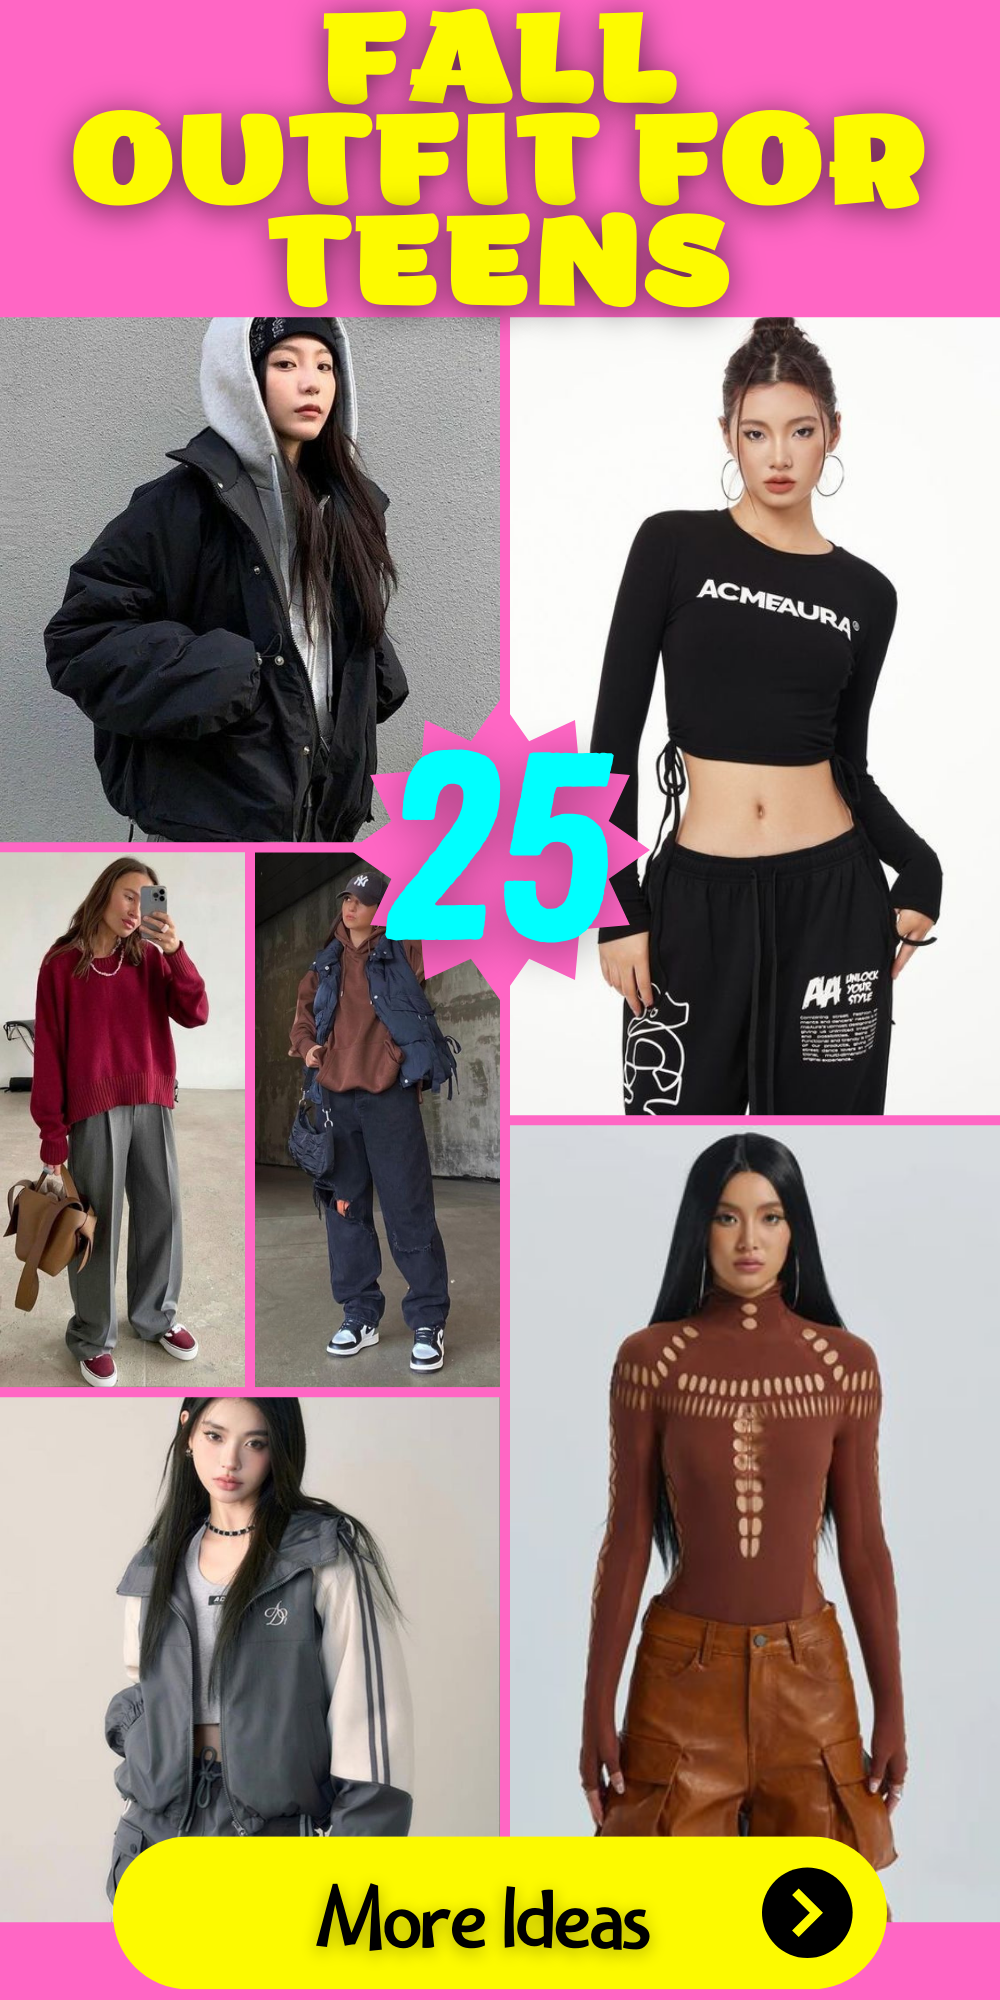 25 Trendy Fall Outfit Ideas for Teens